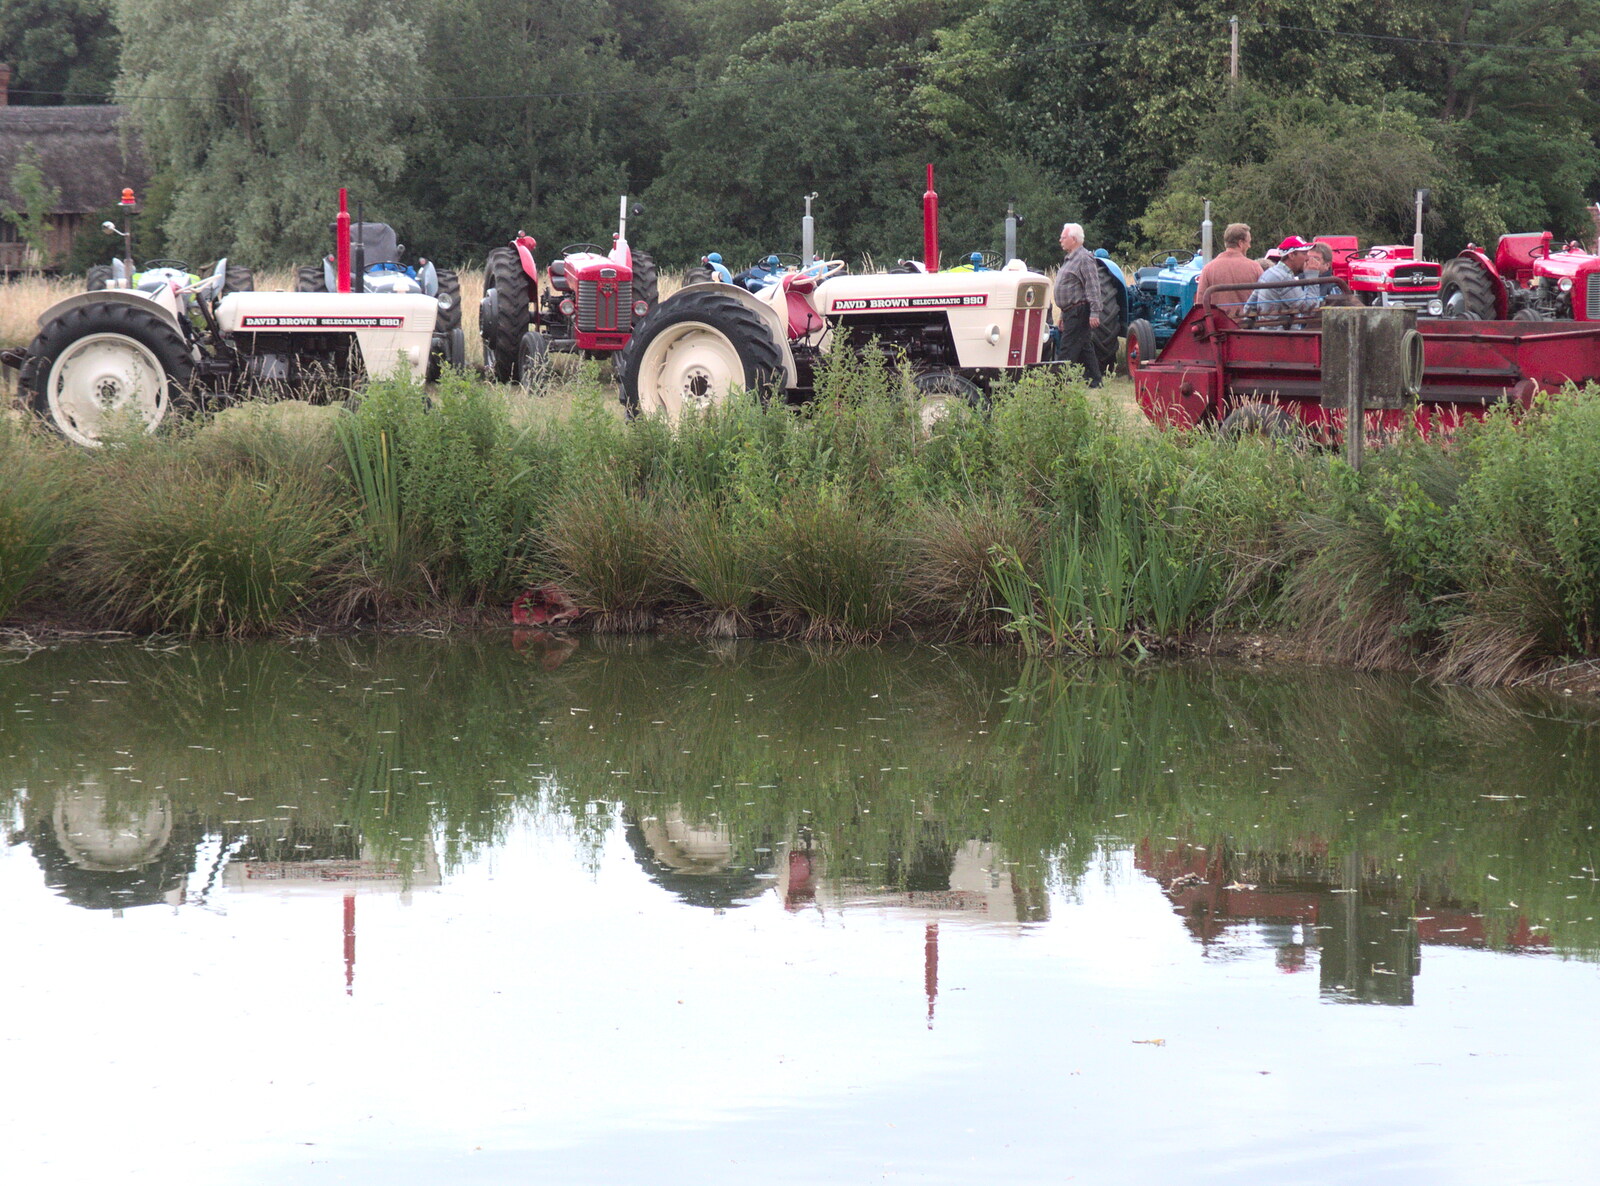 Tractors reflected on the pond from Thrandeston Pig, Little Green, Thrandeston, Suffolk - 25th June 2017